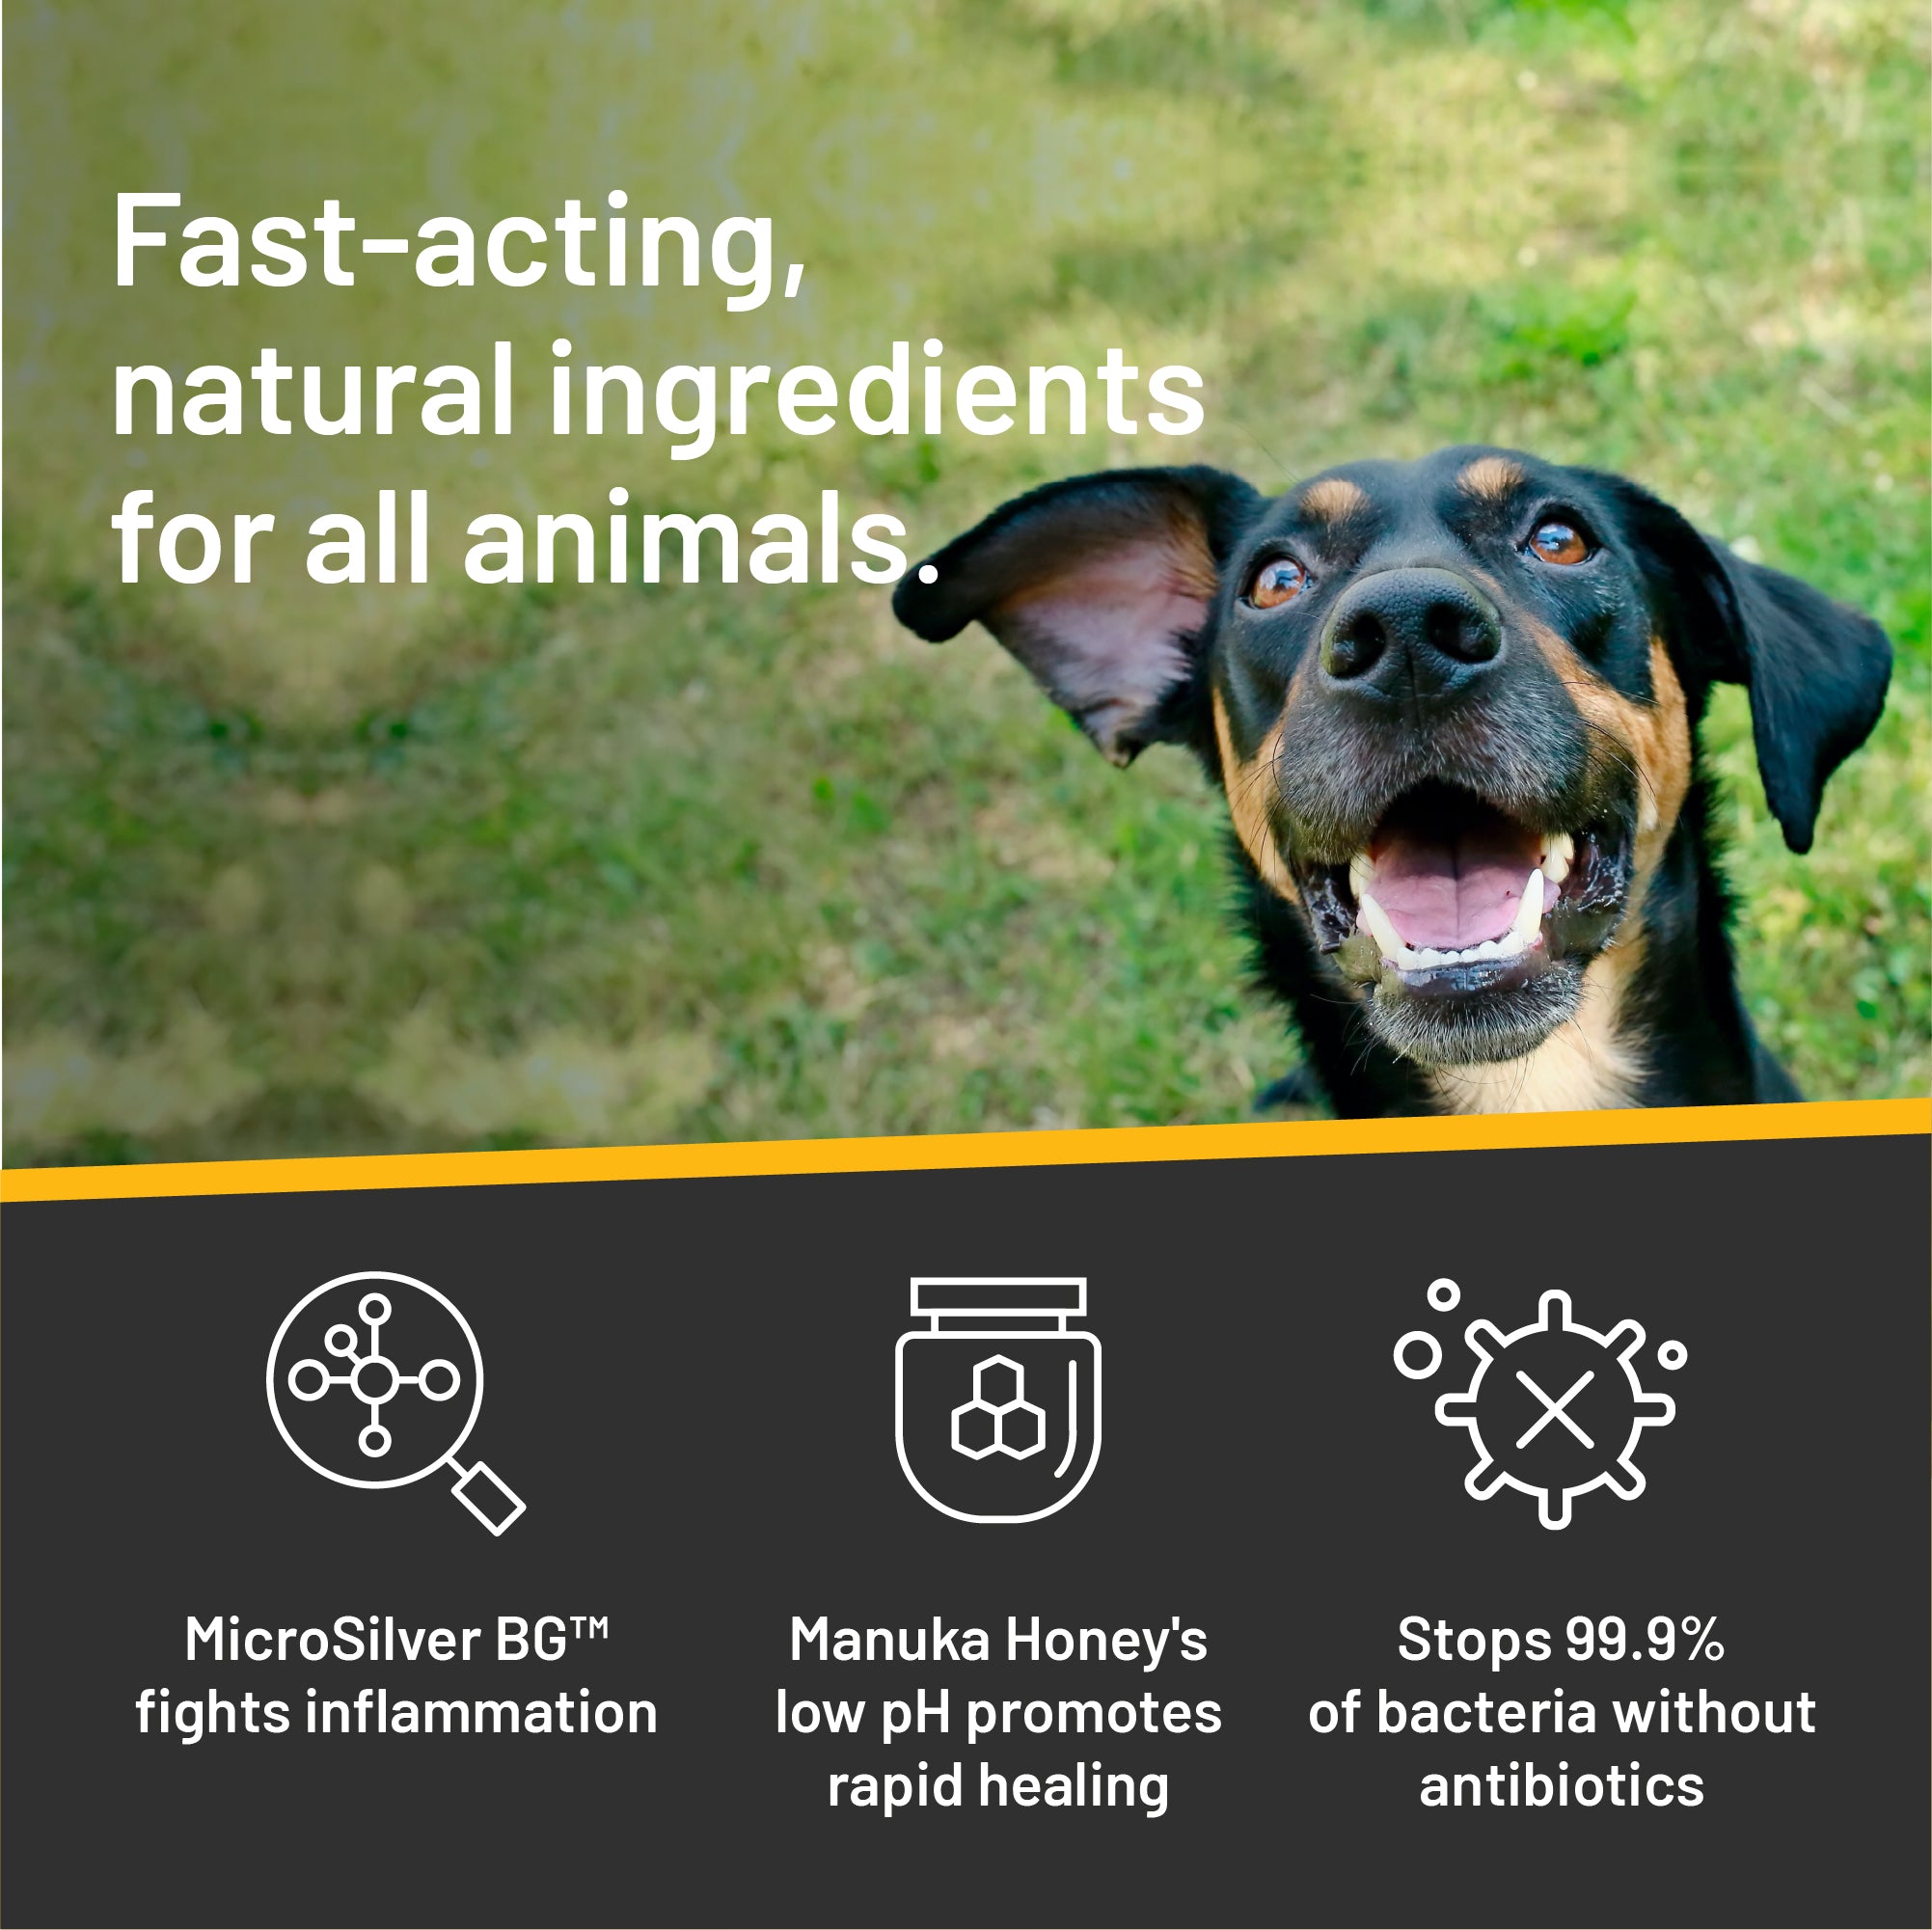 Brown and black dog holding his nose up, with his ear flopped open. Fast-acting natural ingredients for all animals. Microsilver BG fights inflammation, manuka honey's low pH promotes rapid healing. Combined ingredients stop 99.9% of bacteria without antibiotics.